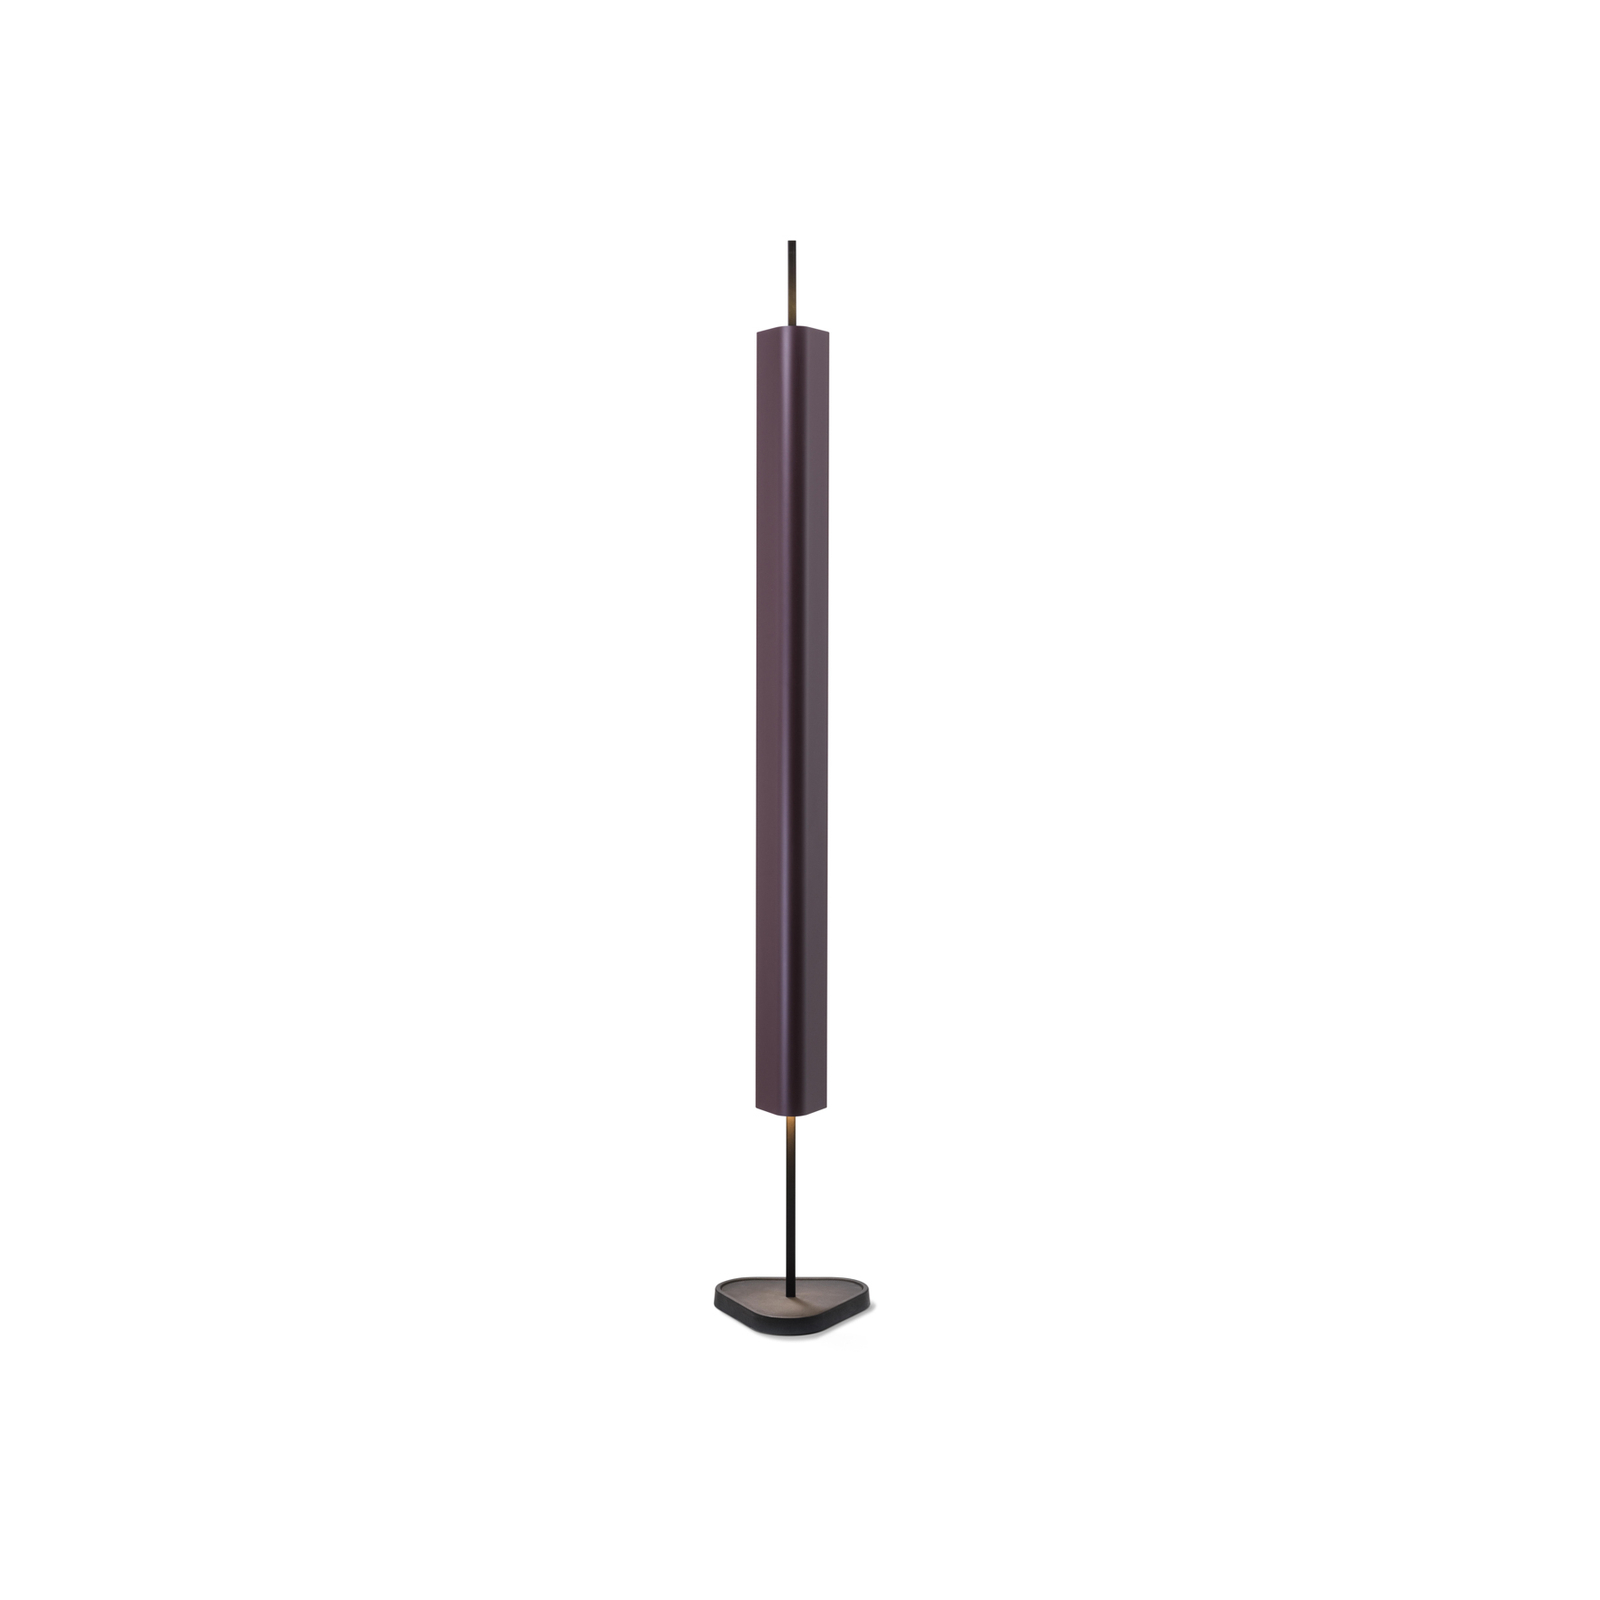 FLOS LED floor lamp Emi, dark red, dimmable, height 170 cm